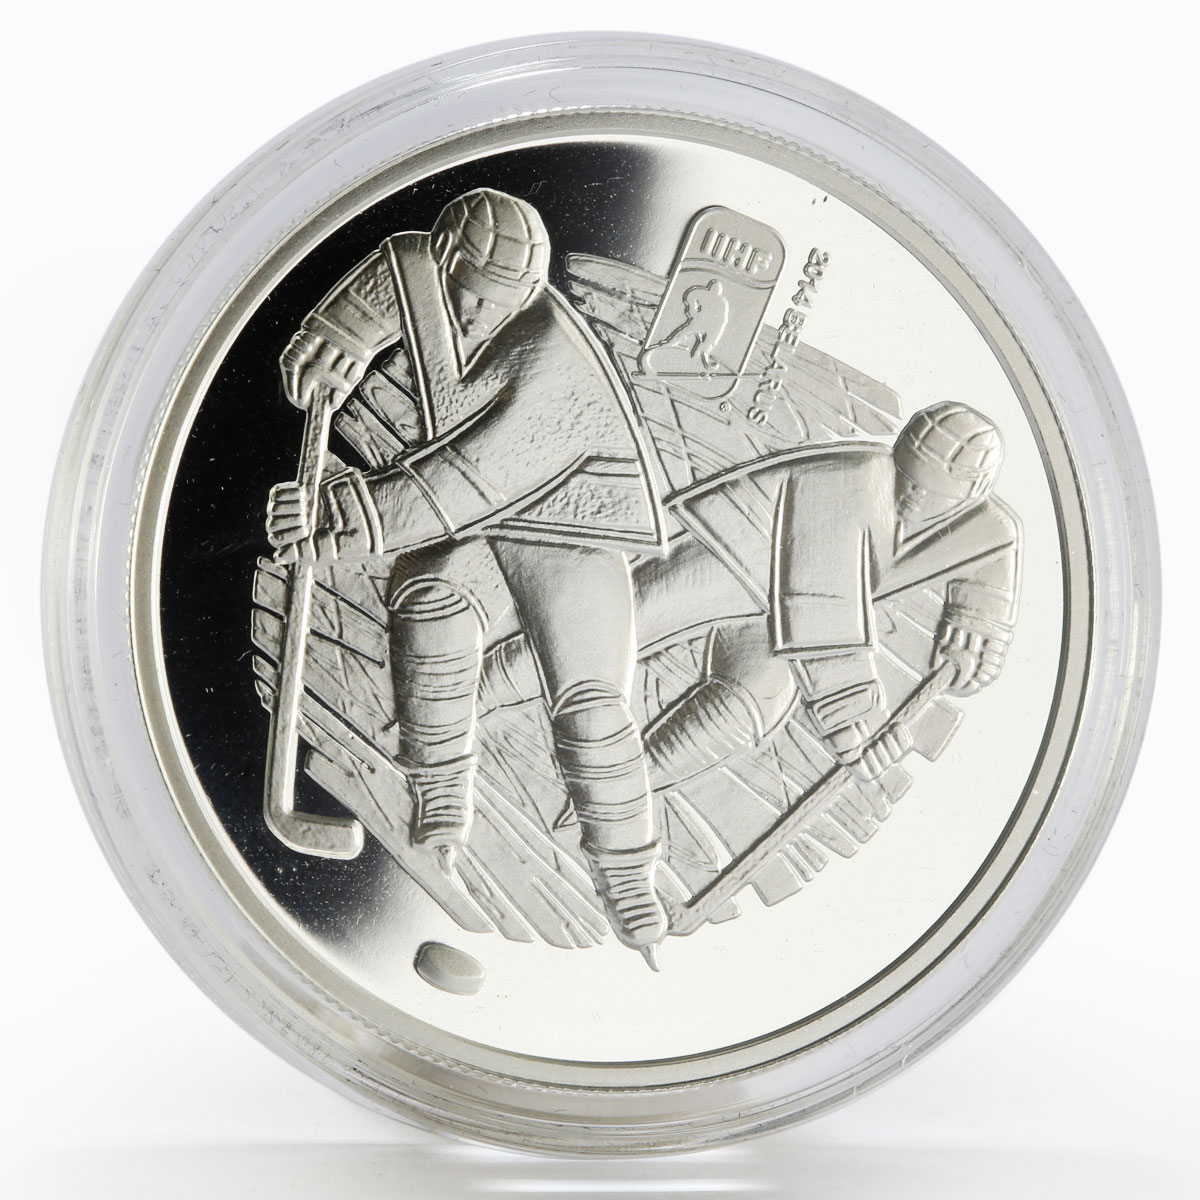 Belarus 20 rubles The 2014 World Ice Hockey Cup Chyzhouka Arena silver coin 2013